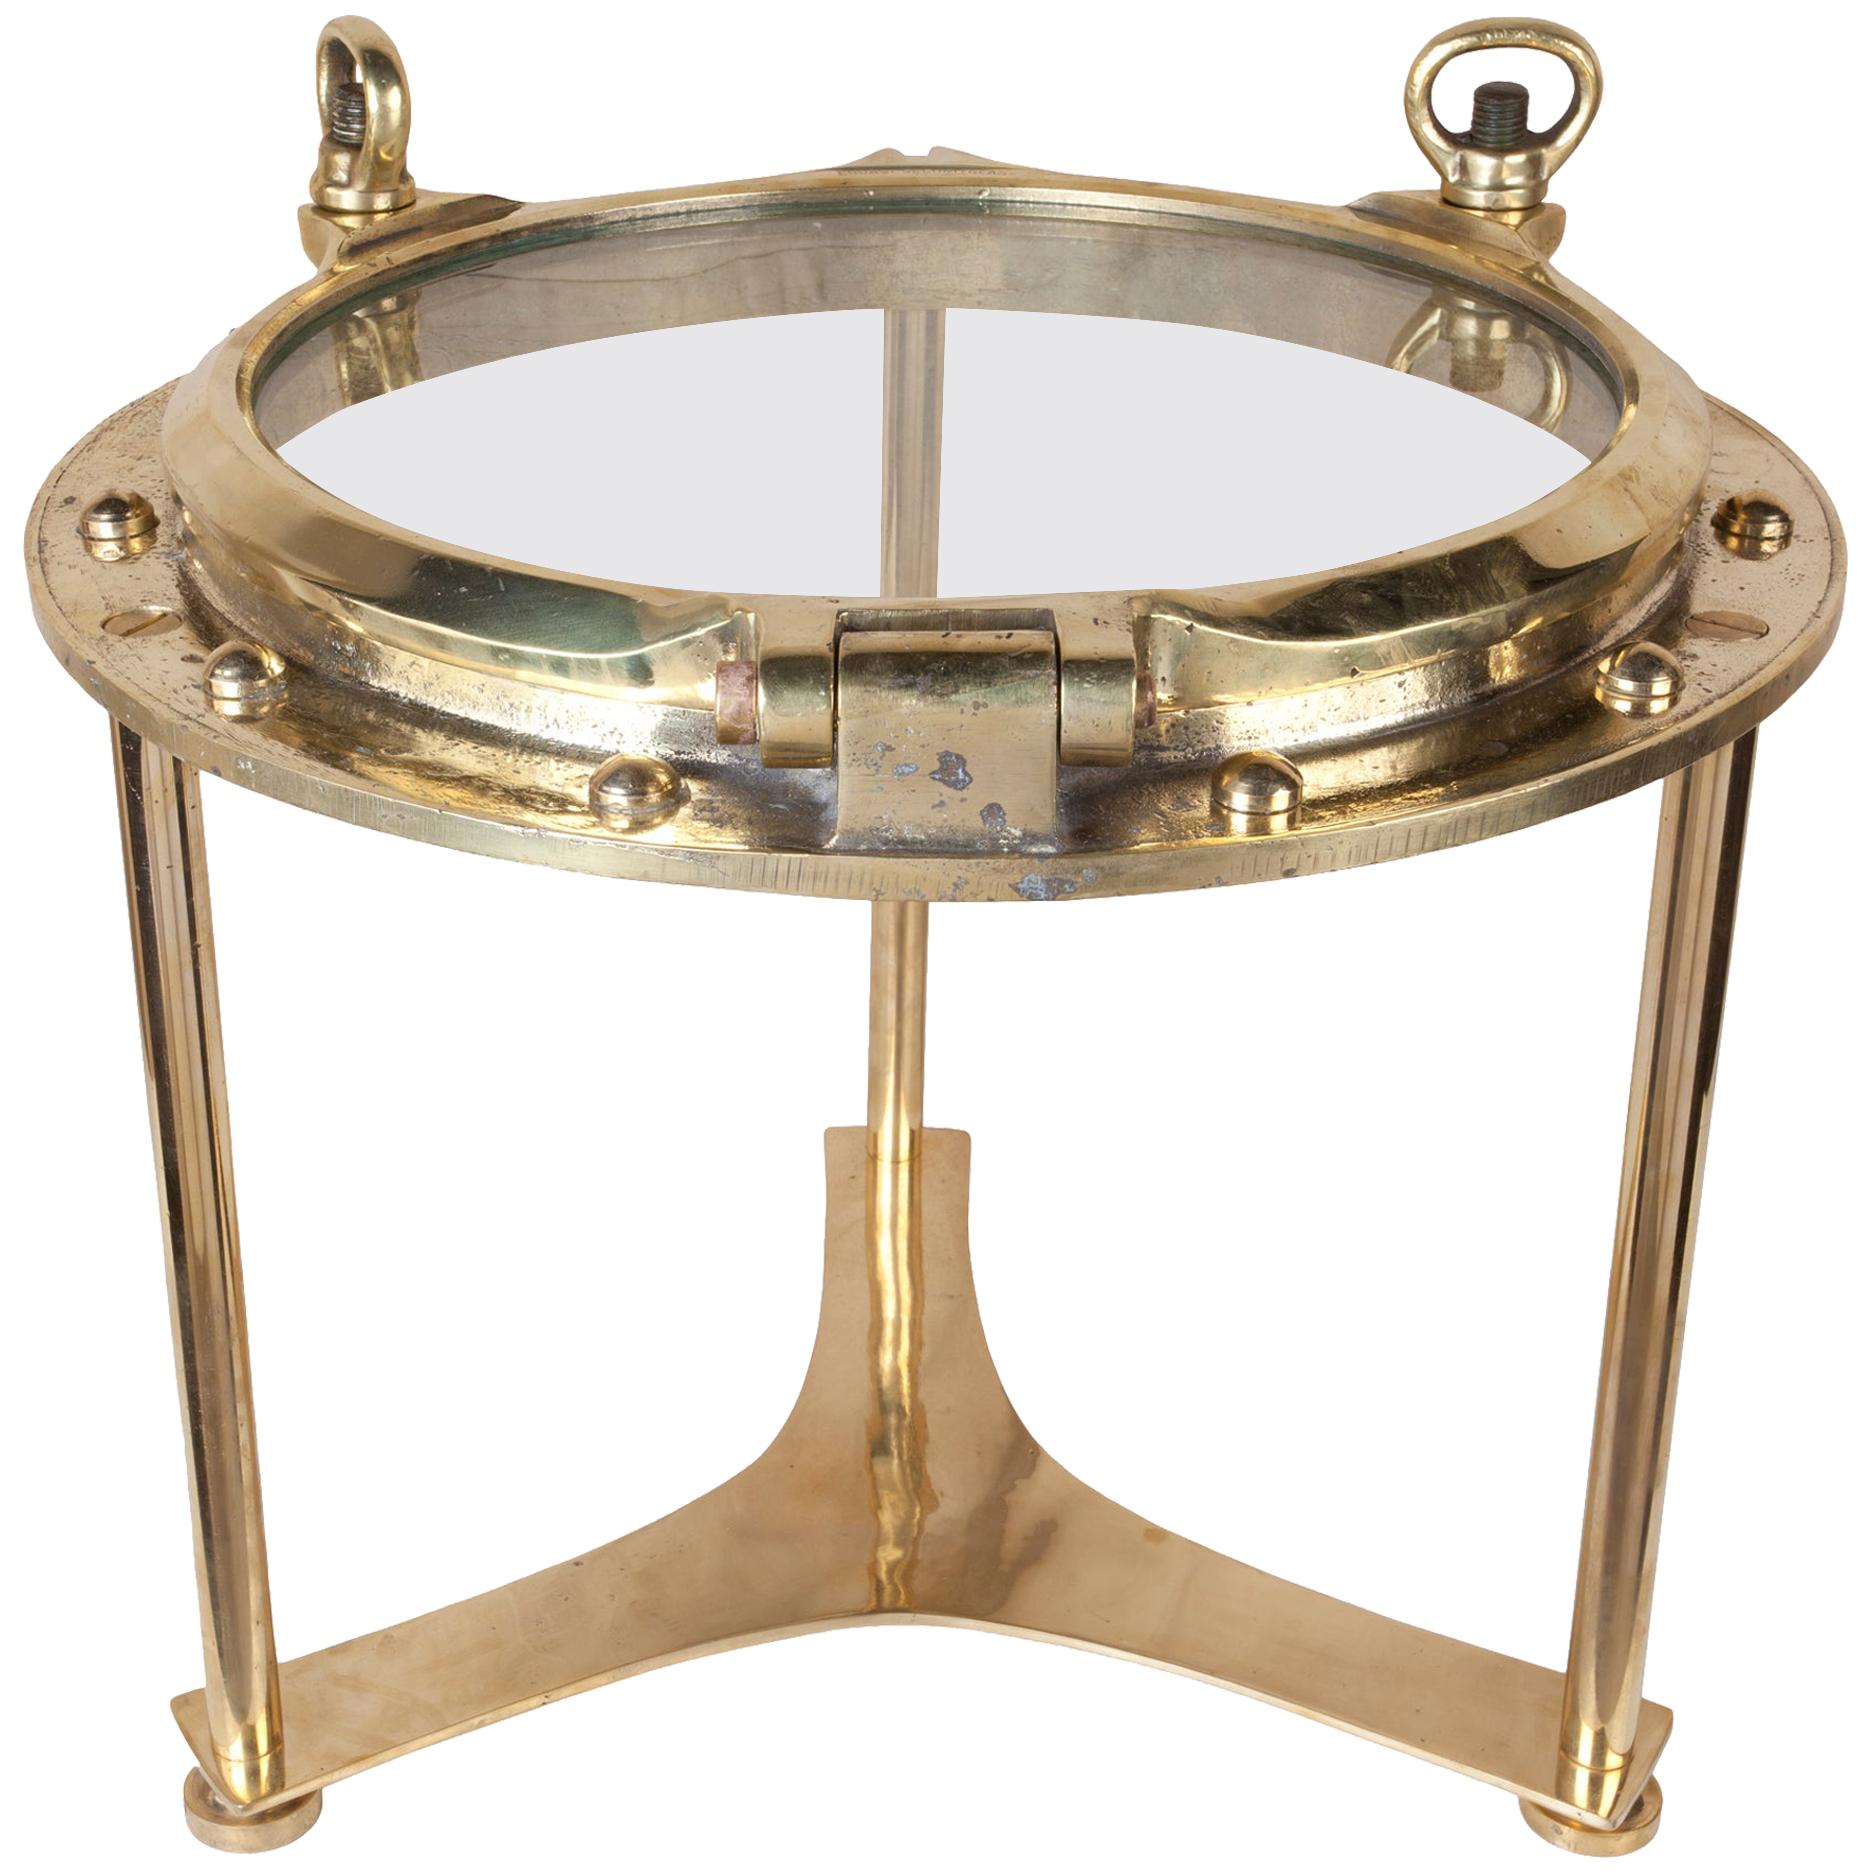 Ship's Brass Porthole Coffee or Side Table by Deborah Lockhart Phillips For Sale